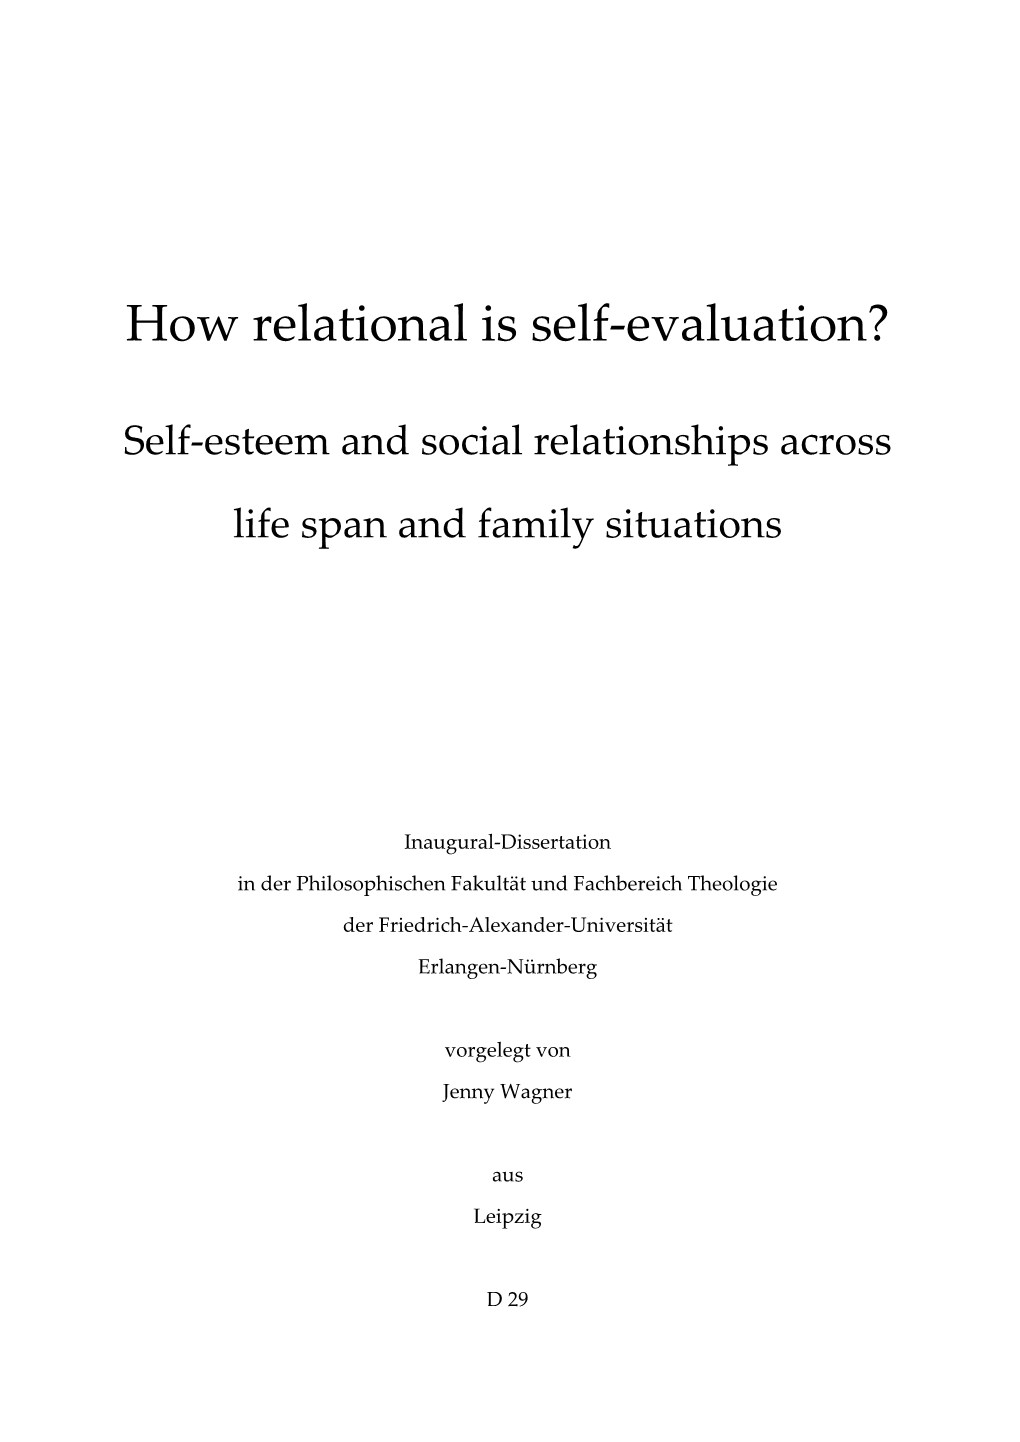 How Relational Is Self-Evaluation?